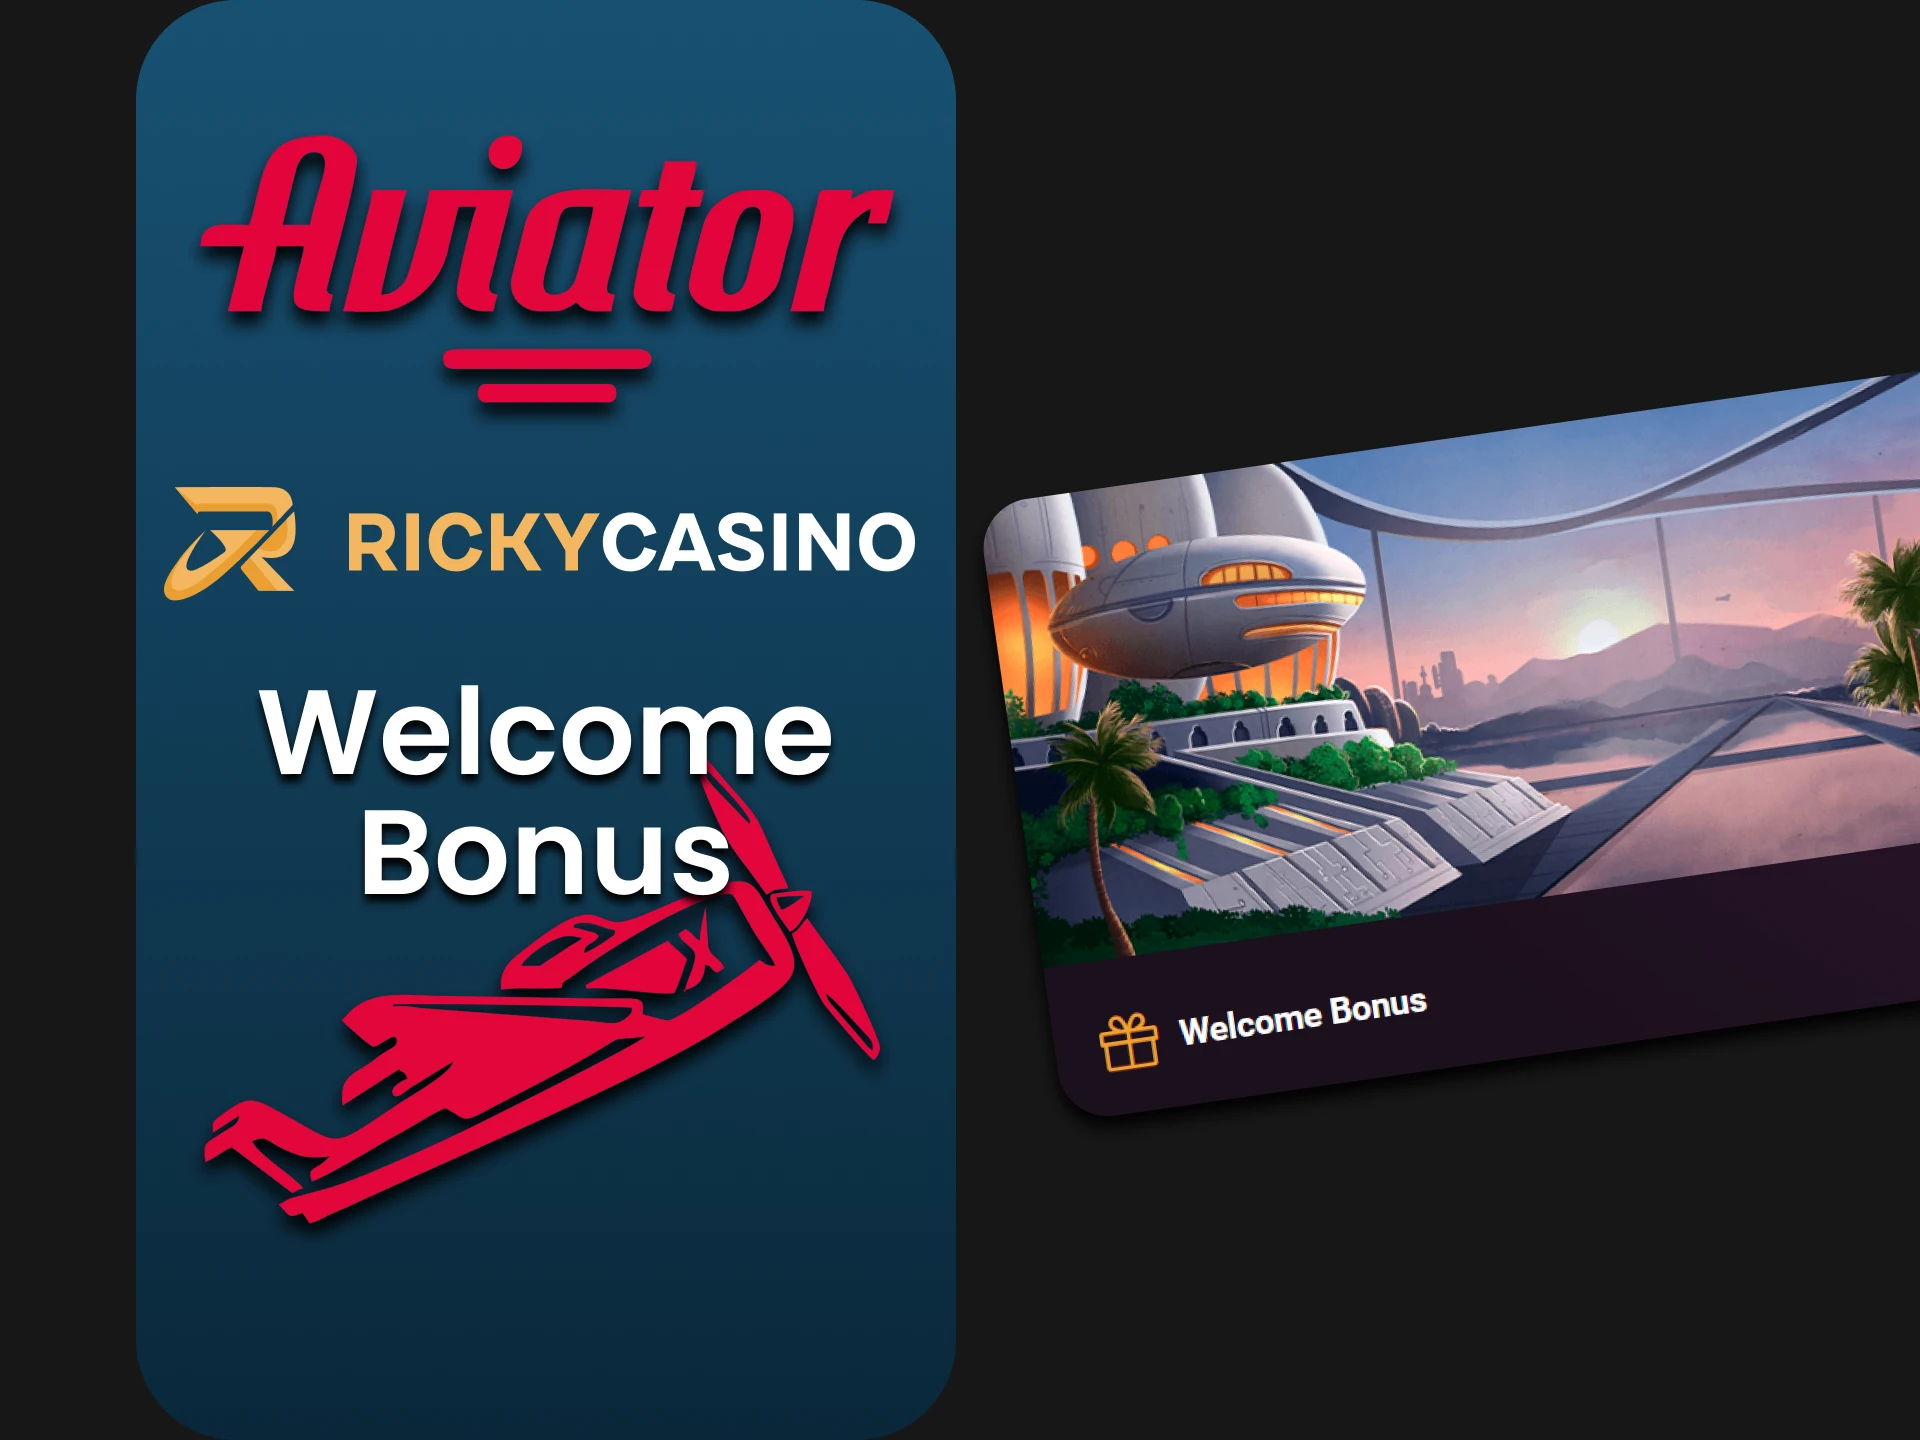 Ricky Casino is giving a welcome bonus to the Aviator.